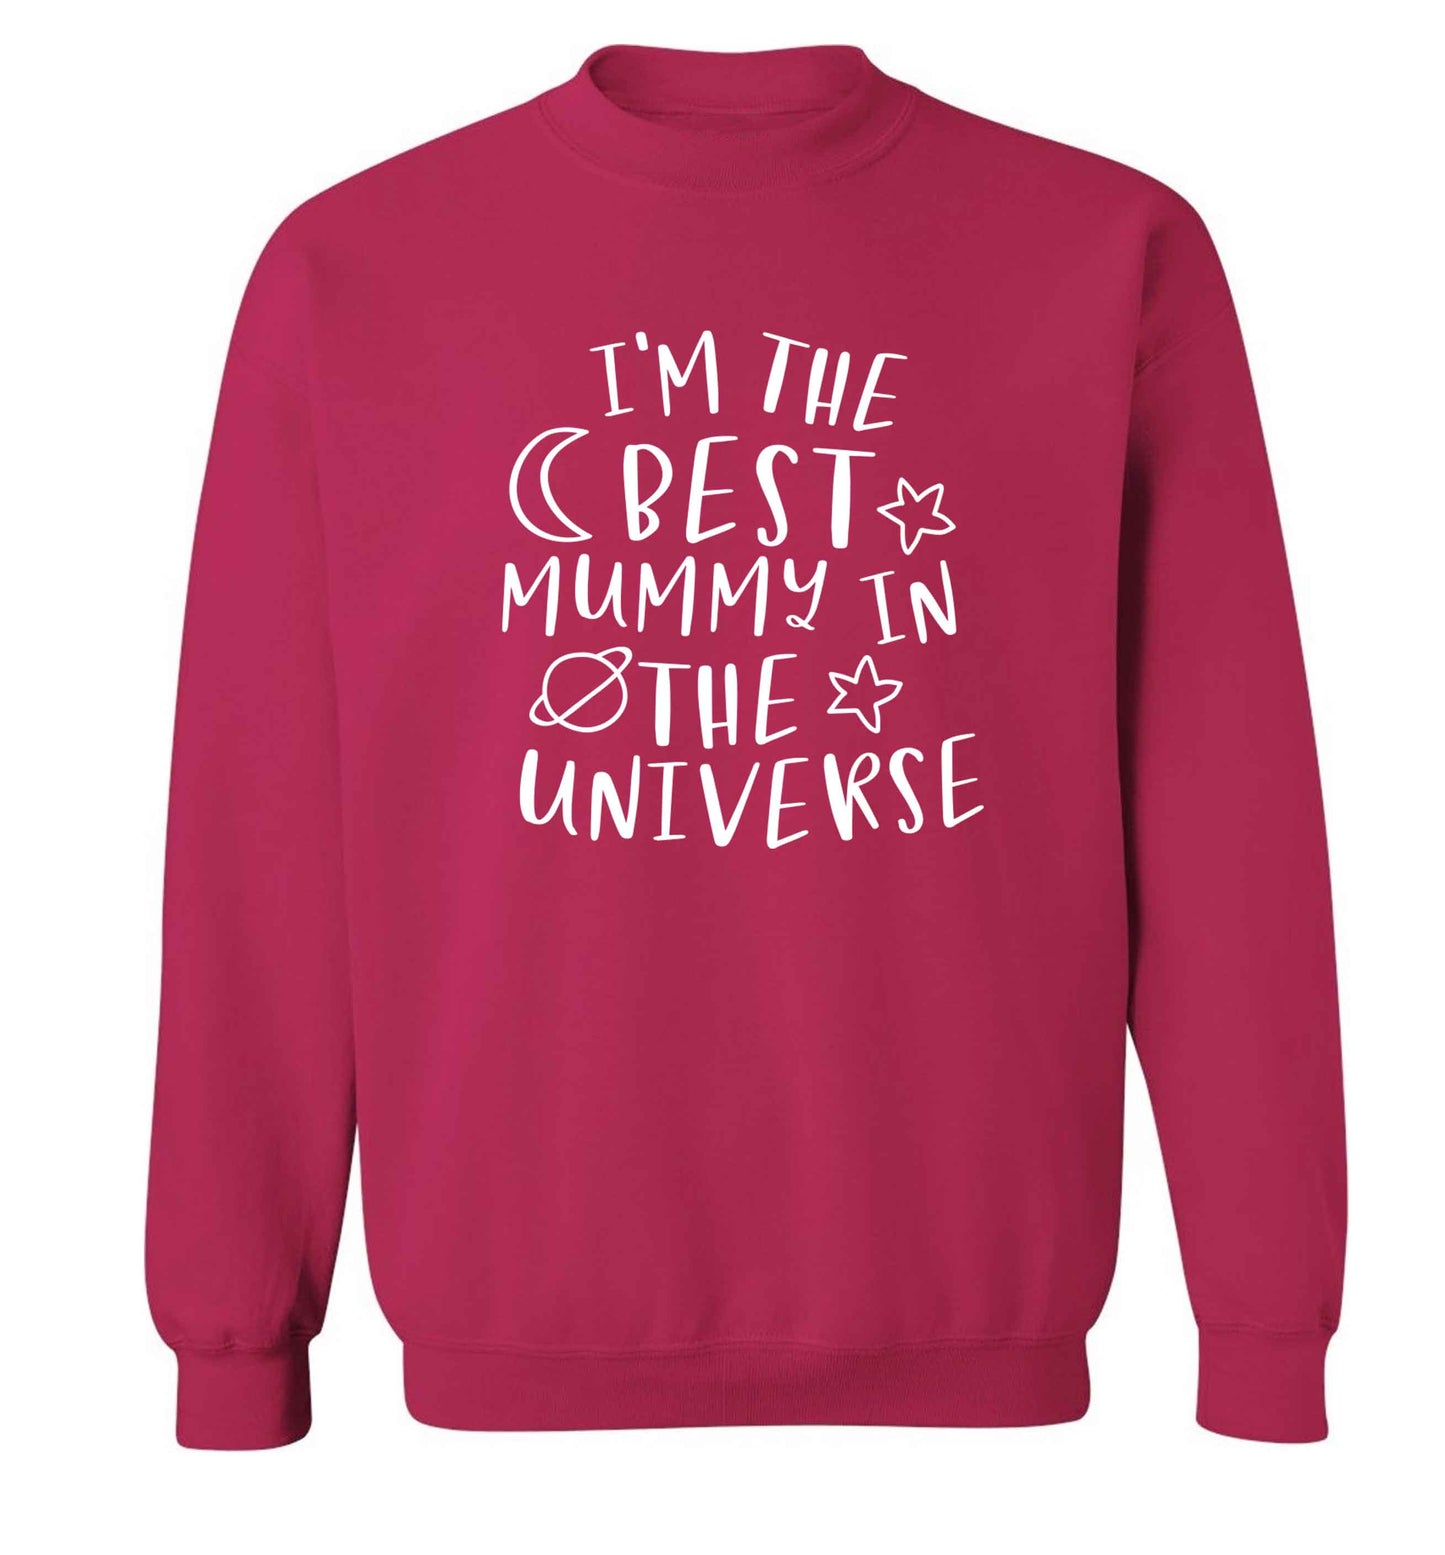 I'm the best mummy in the universe adult's unisex pink sweater 2XL